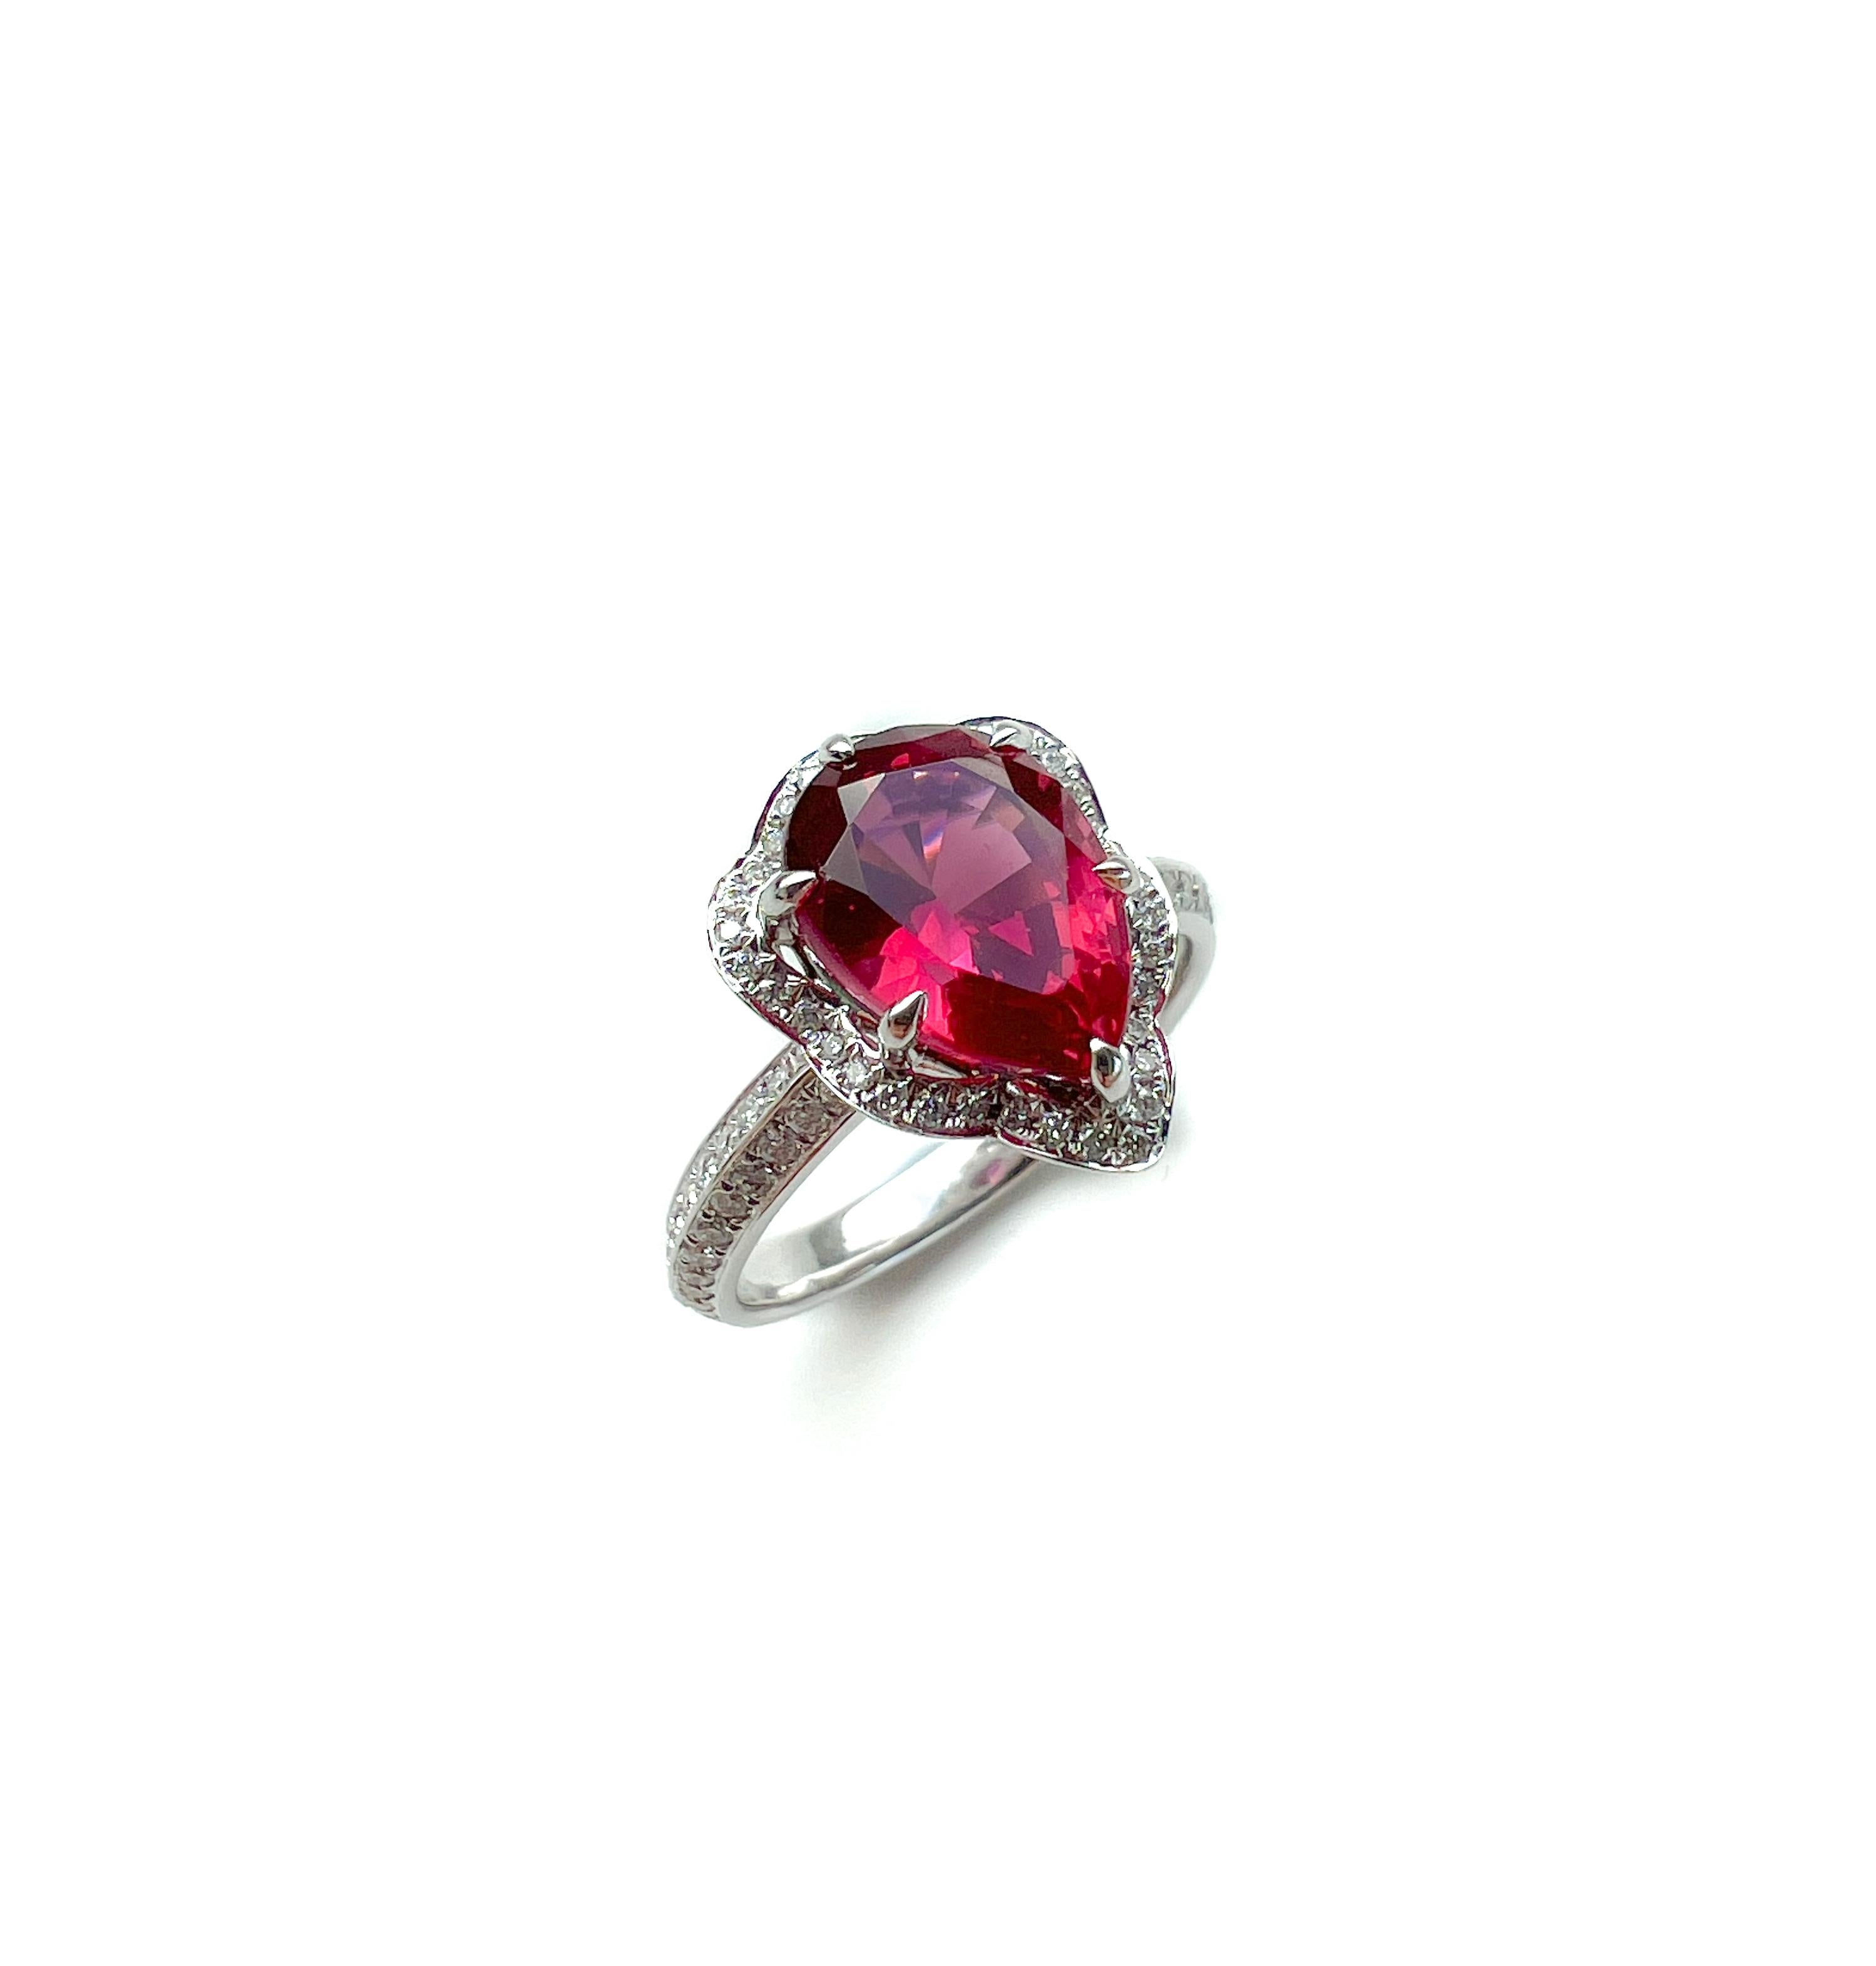 Women's GIA Certified 3.09ct Red Spinel Cocktail Ring Ornate Halo For Sale